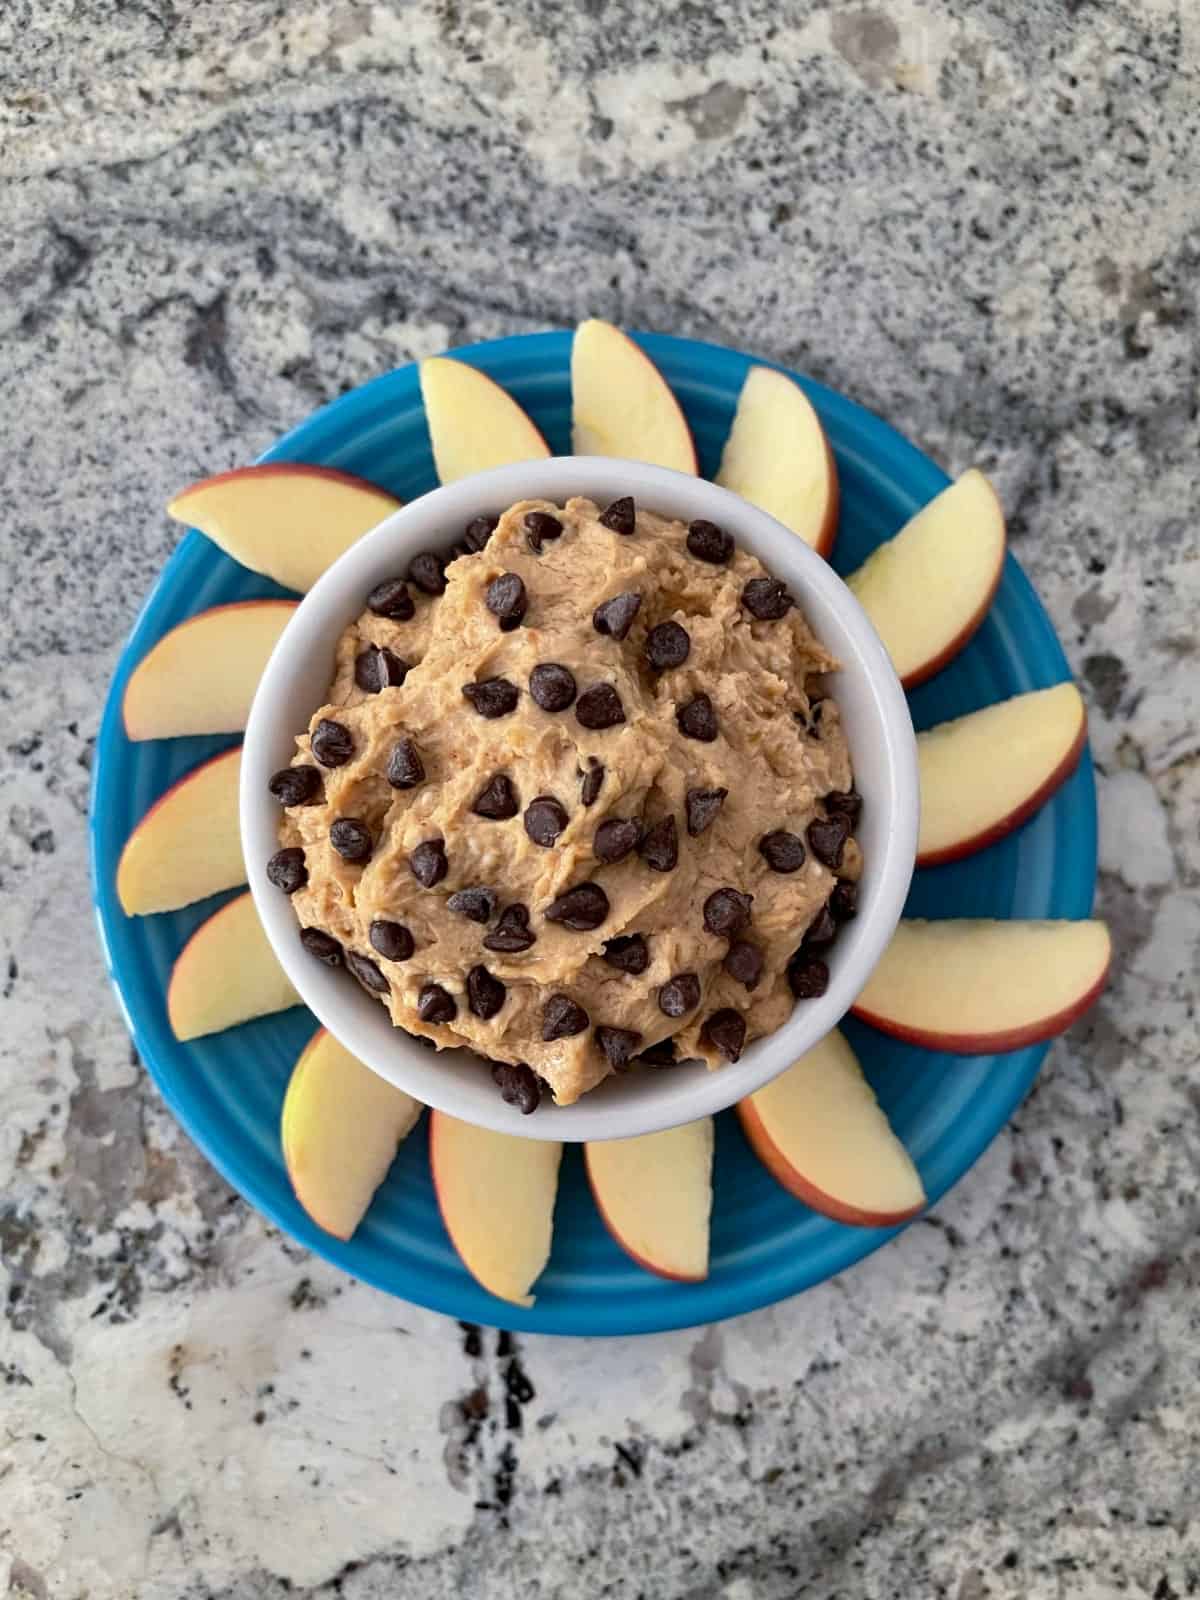 Peanut butter cup fruit dip with apple slices.